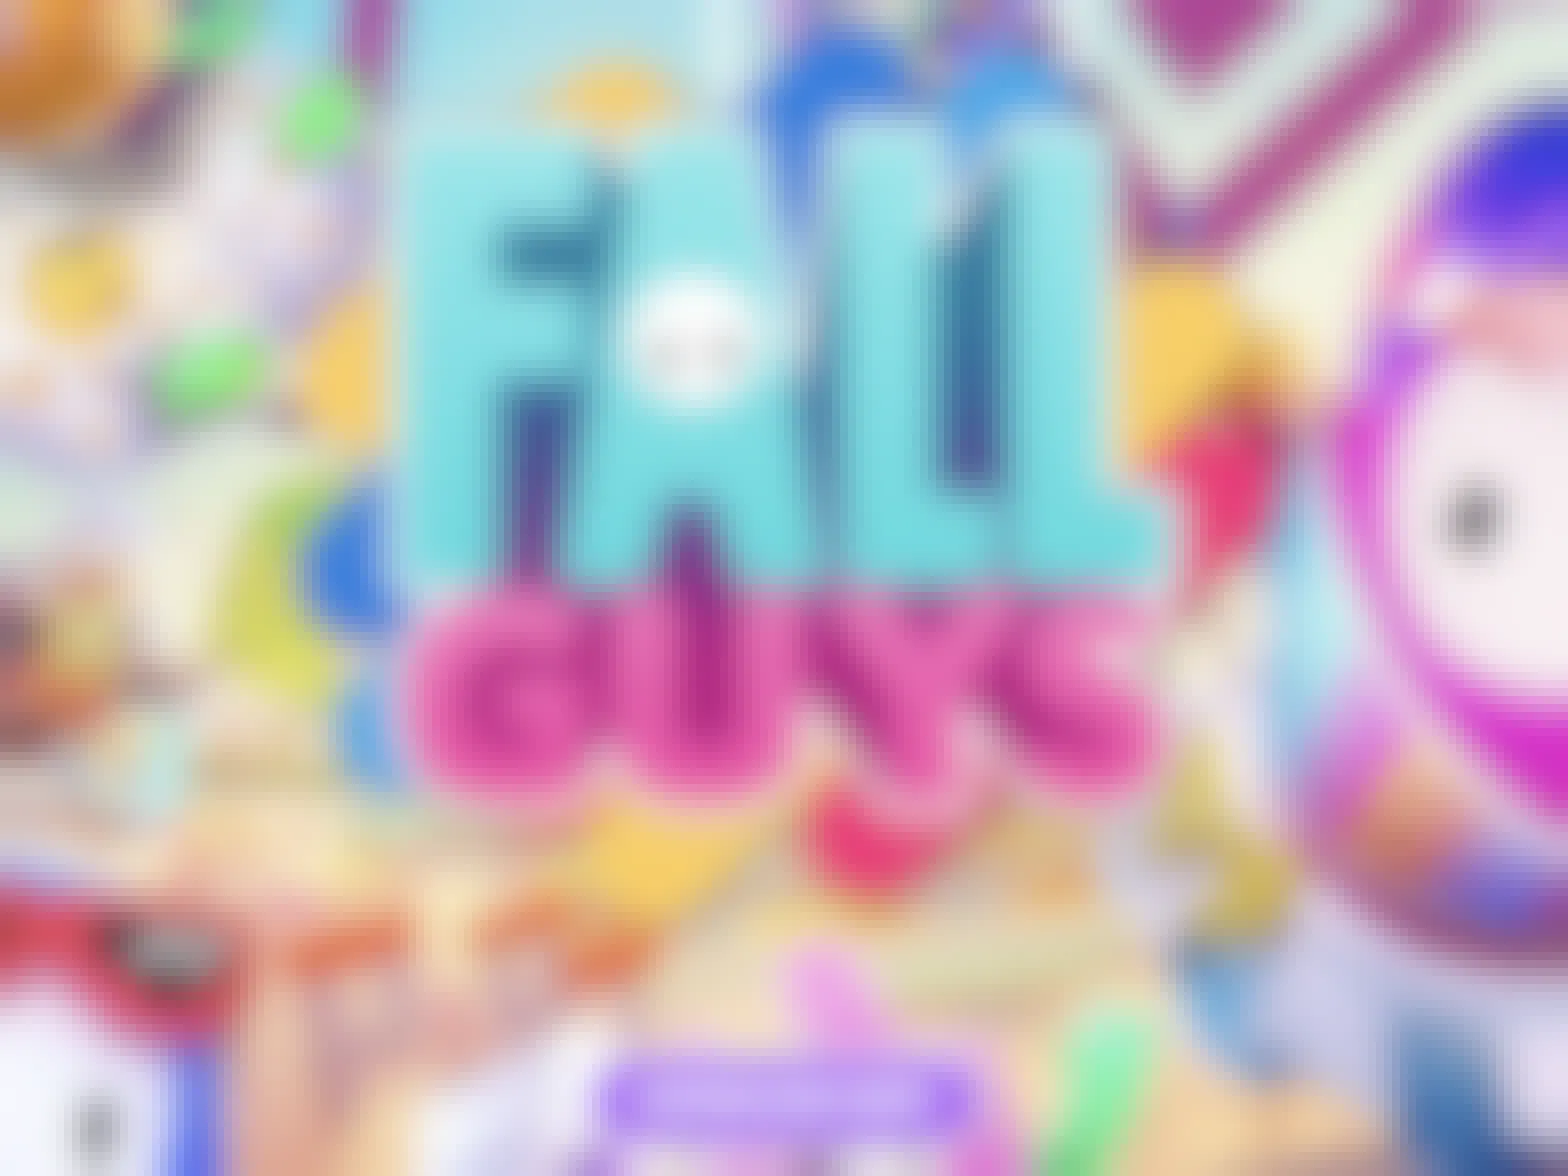 A screenshot from the Fall Guys website banner with a download now button.